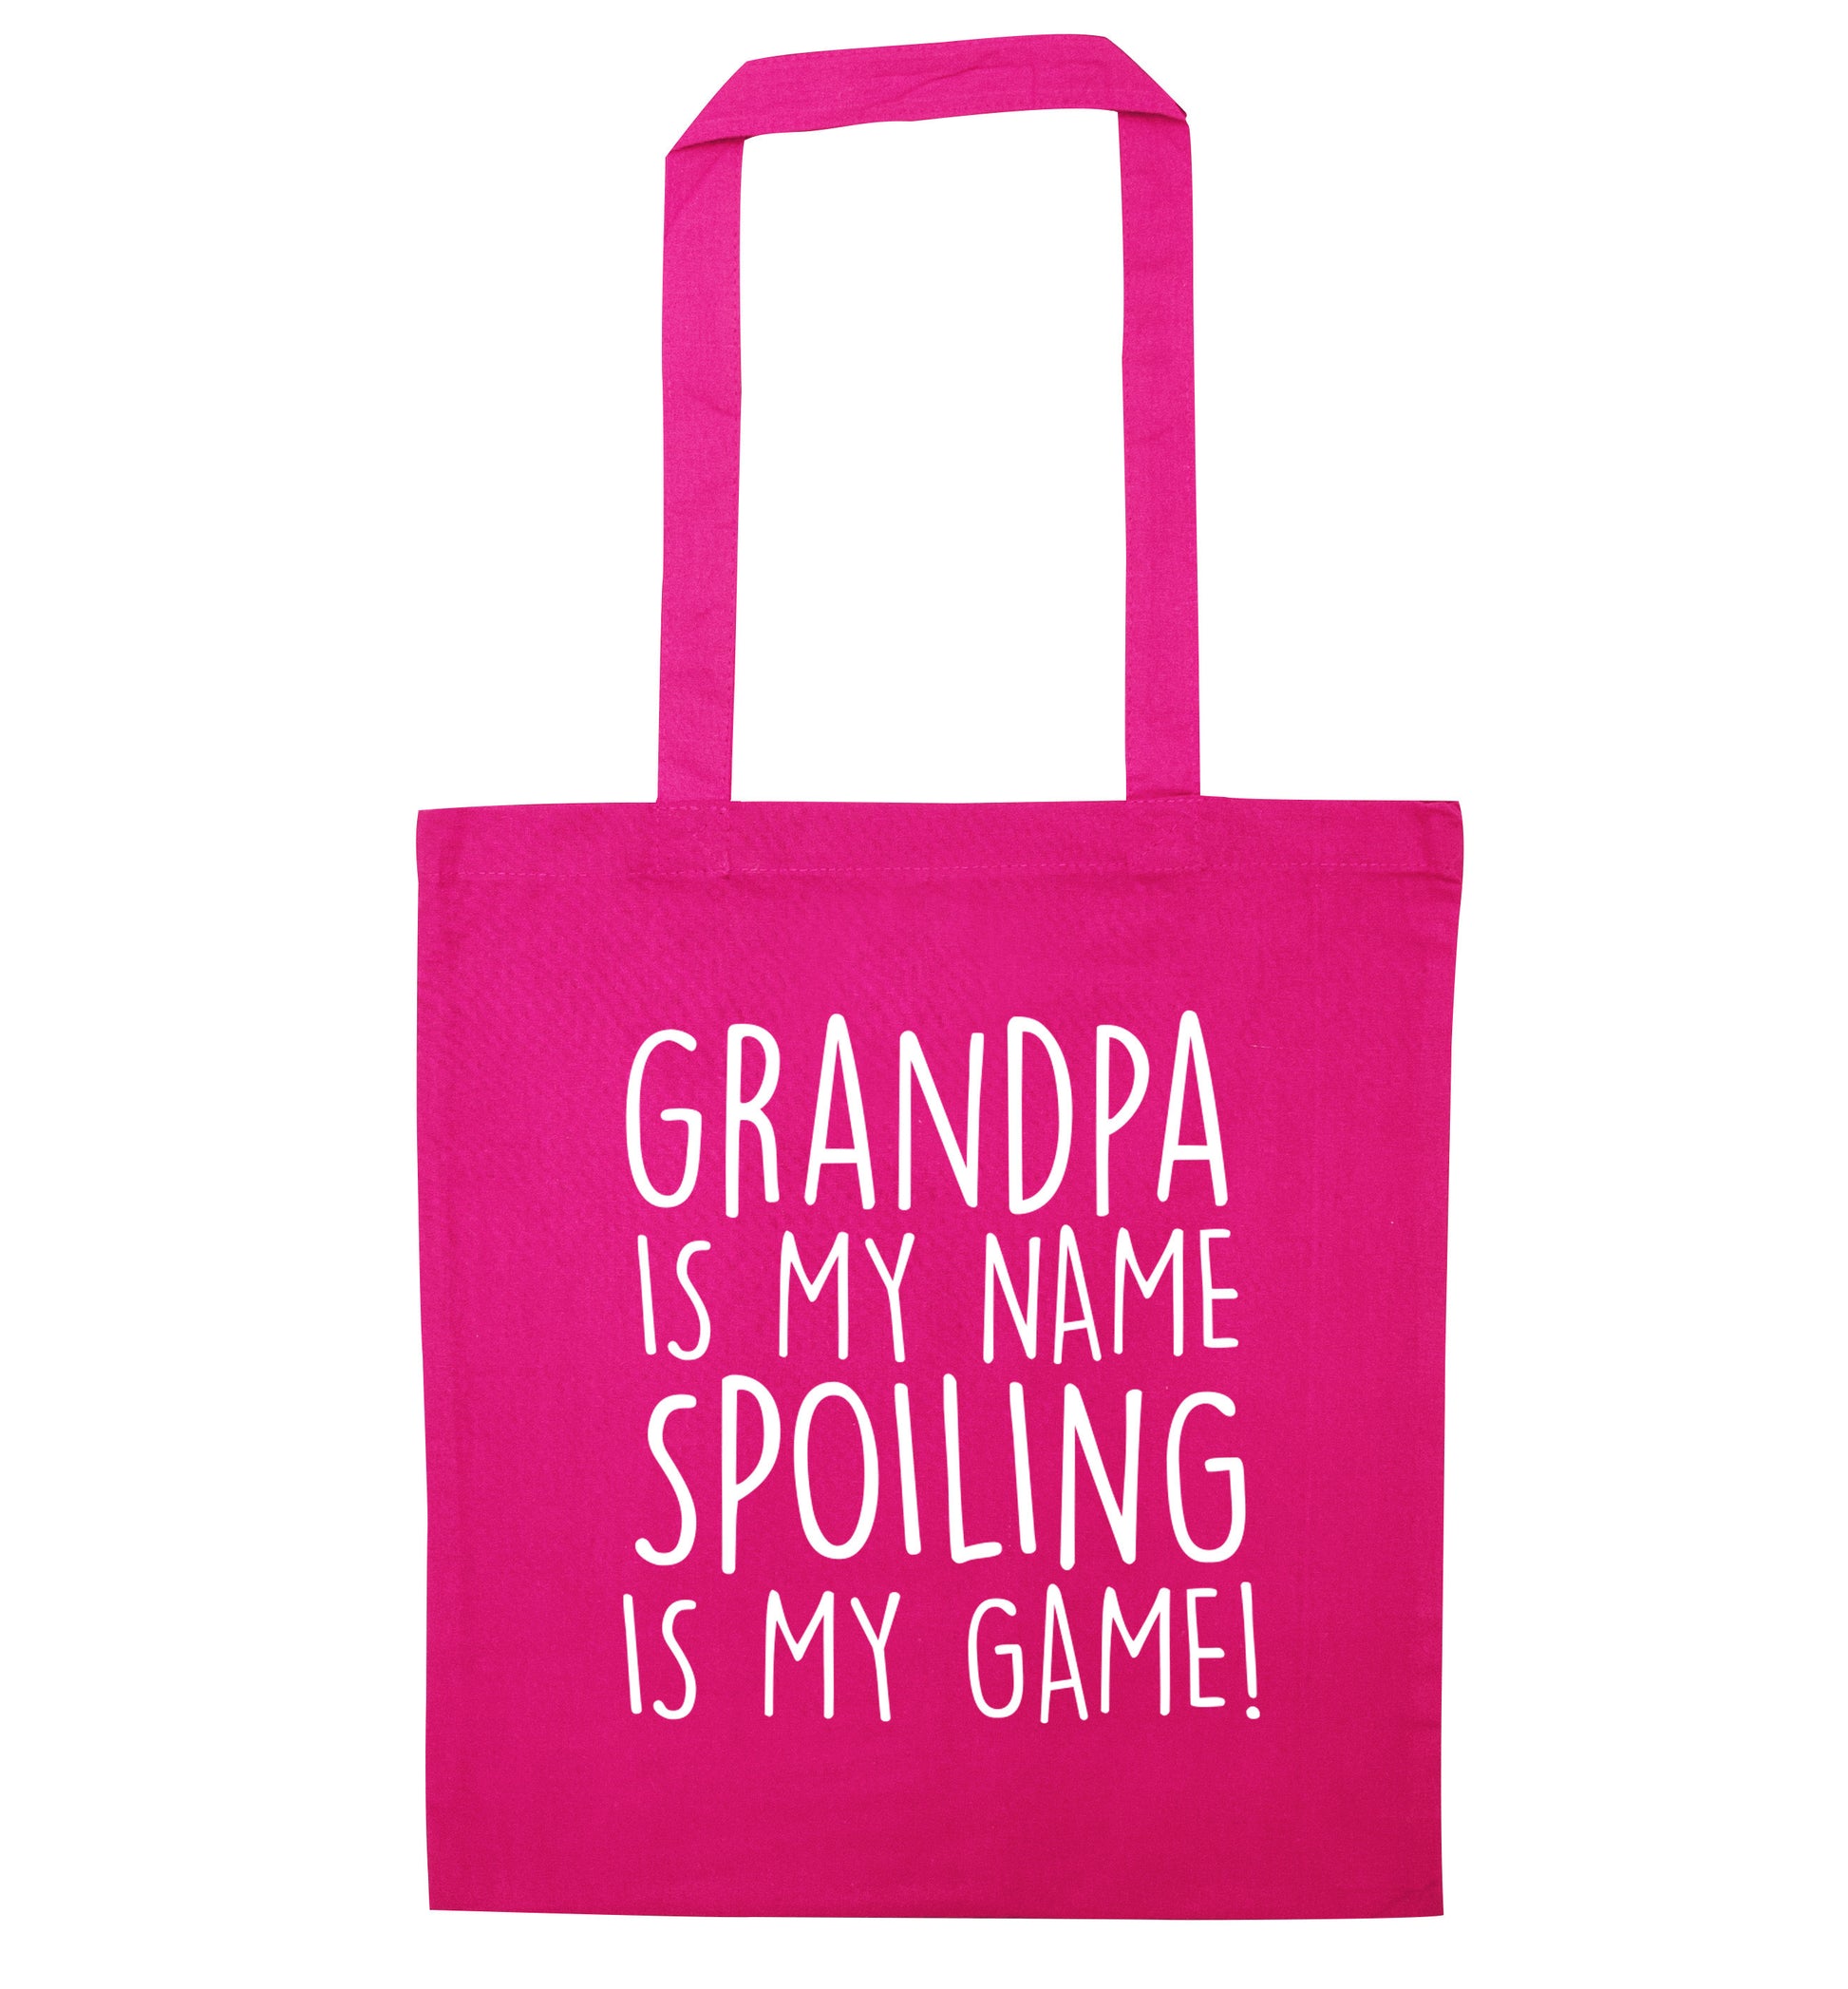 Grandpa is my name, spoiling is my game pink tote bag